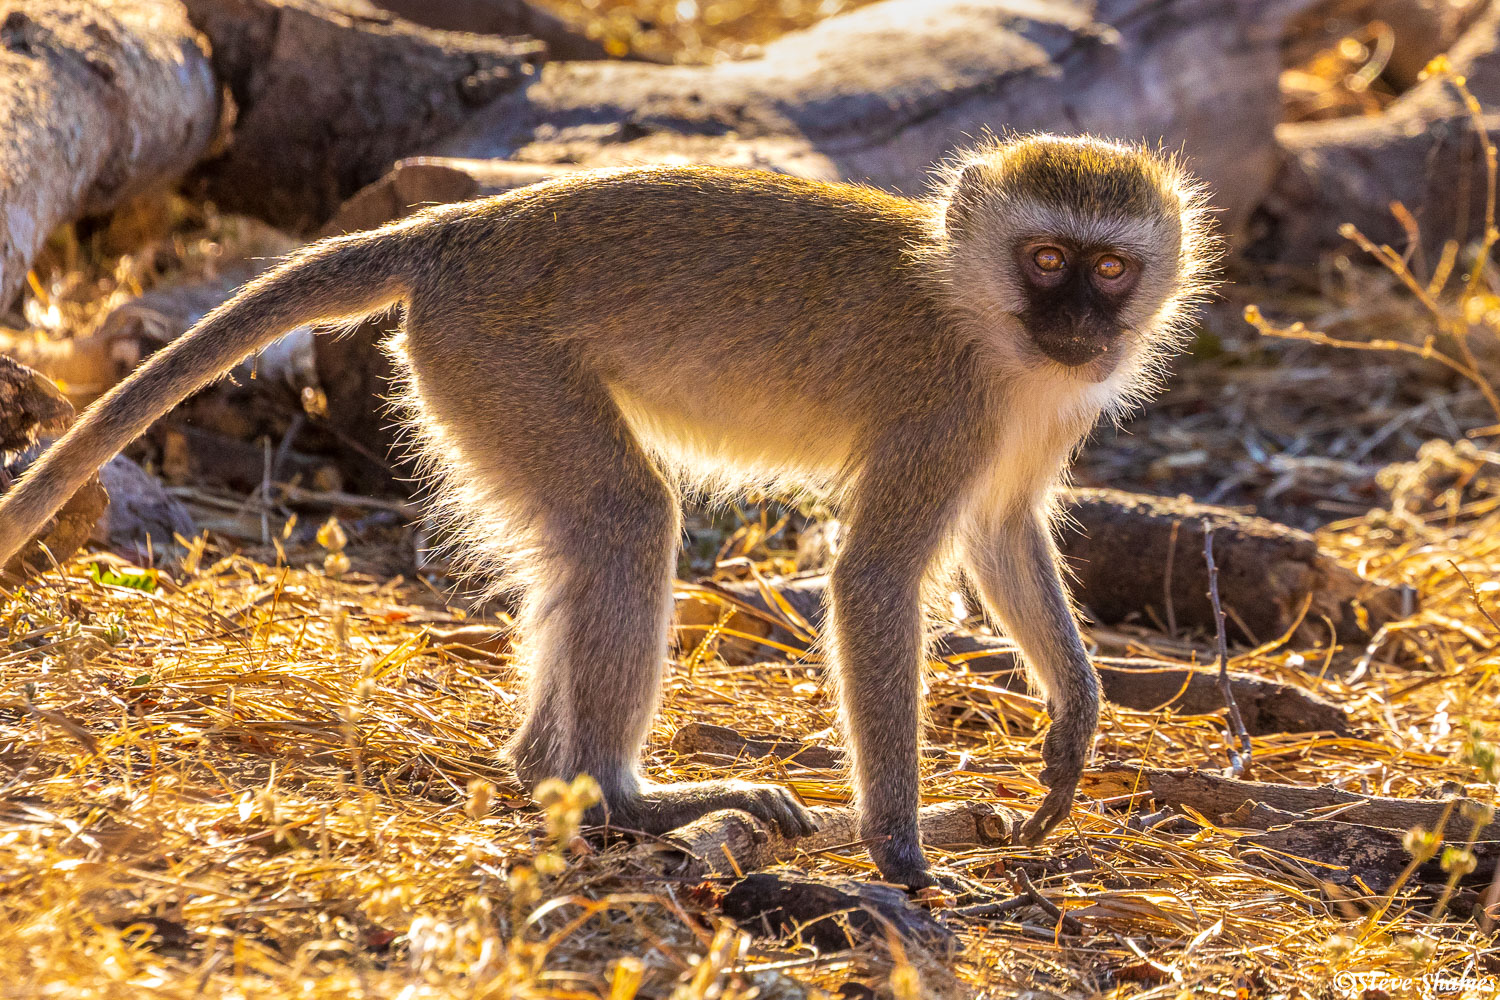 Here is what I call a "glow monkey", when they are backlit by the sun and the outer fur appears to glow.